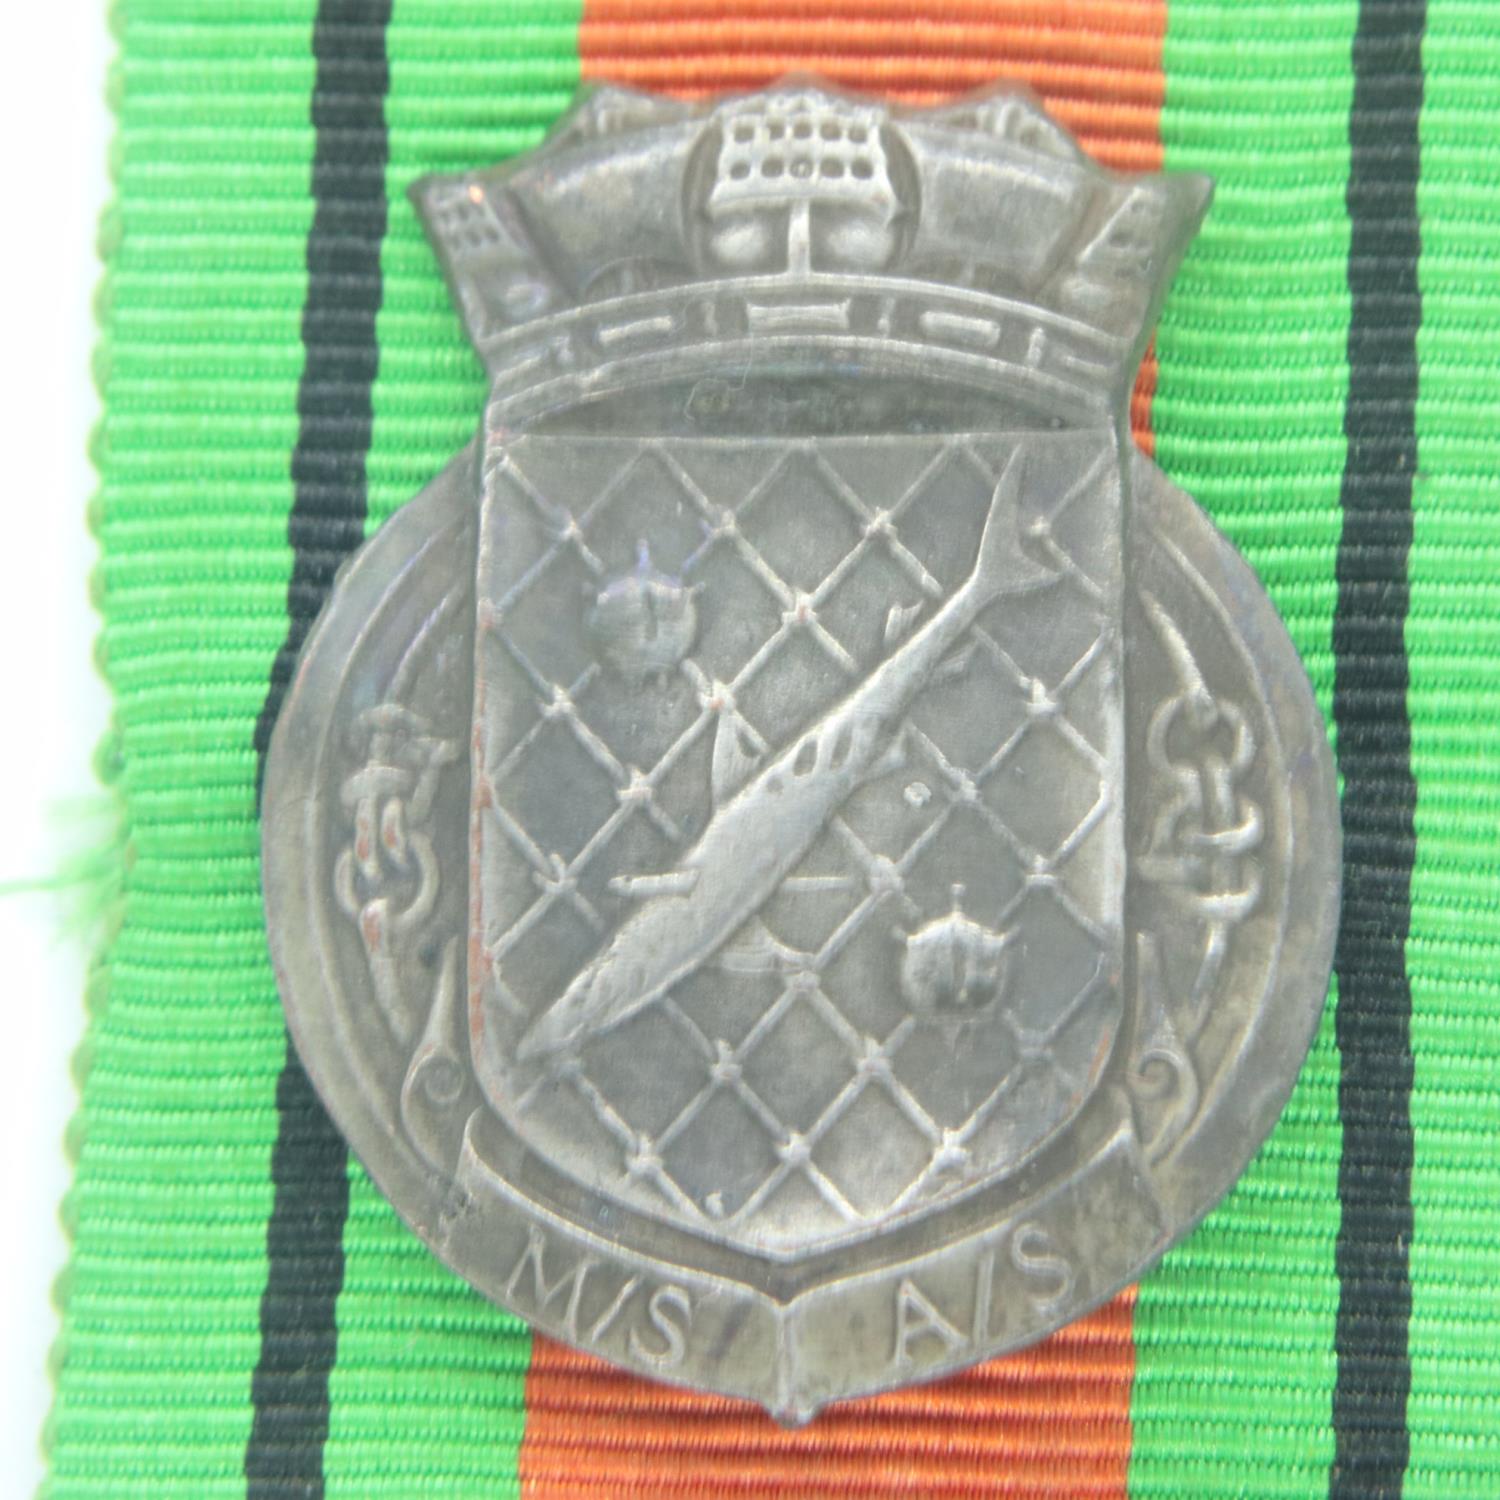 WWII British Defence Medal with a Royal Navy Patrol Boat Service, Minesweeper and Anti-Submarine - Image 2 of 3